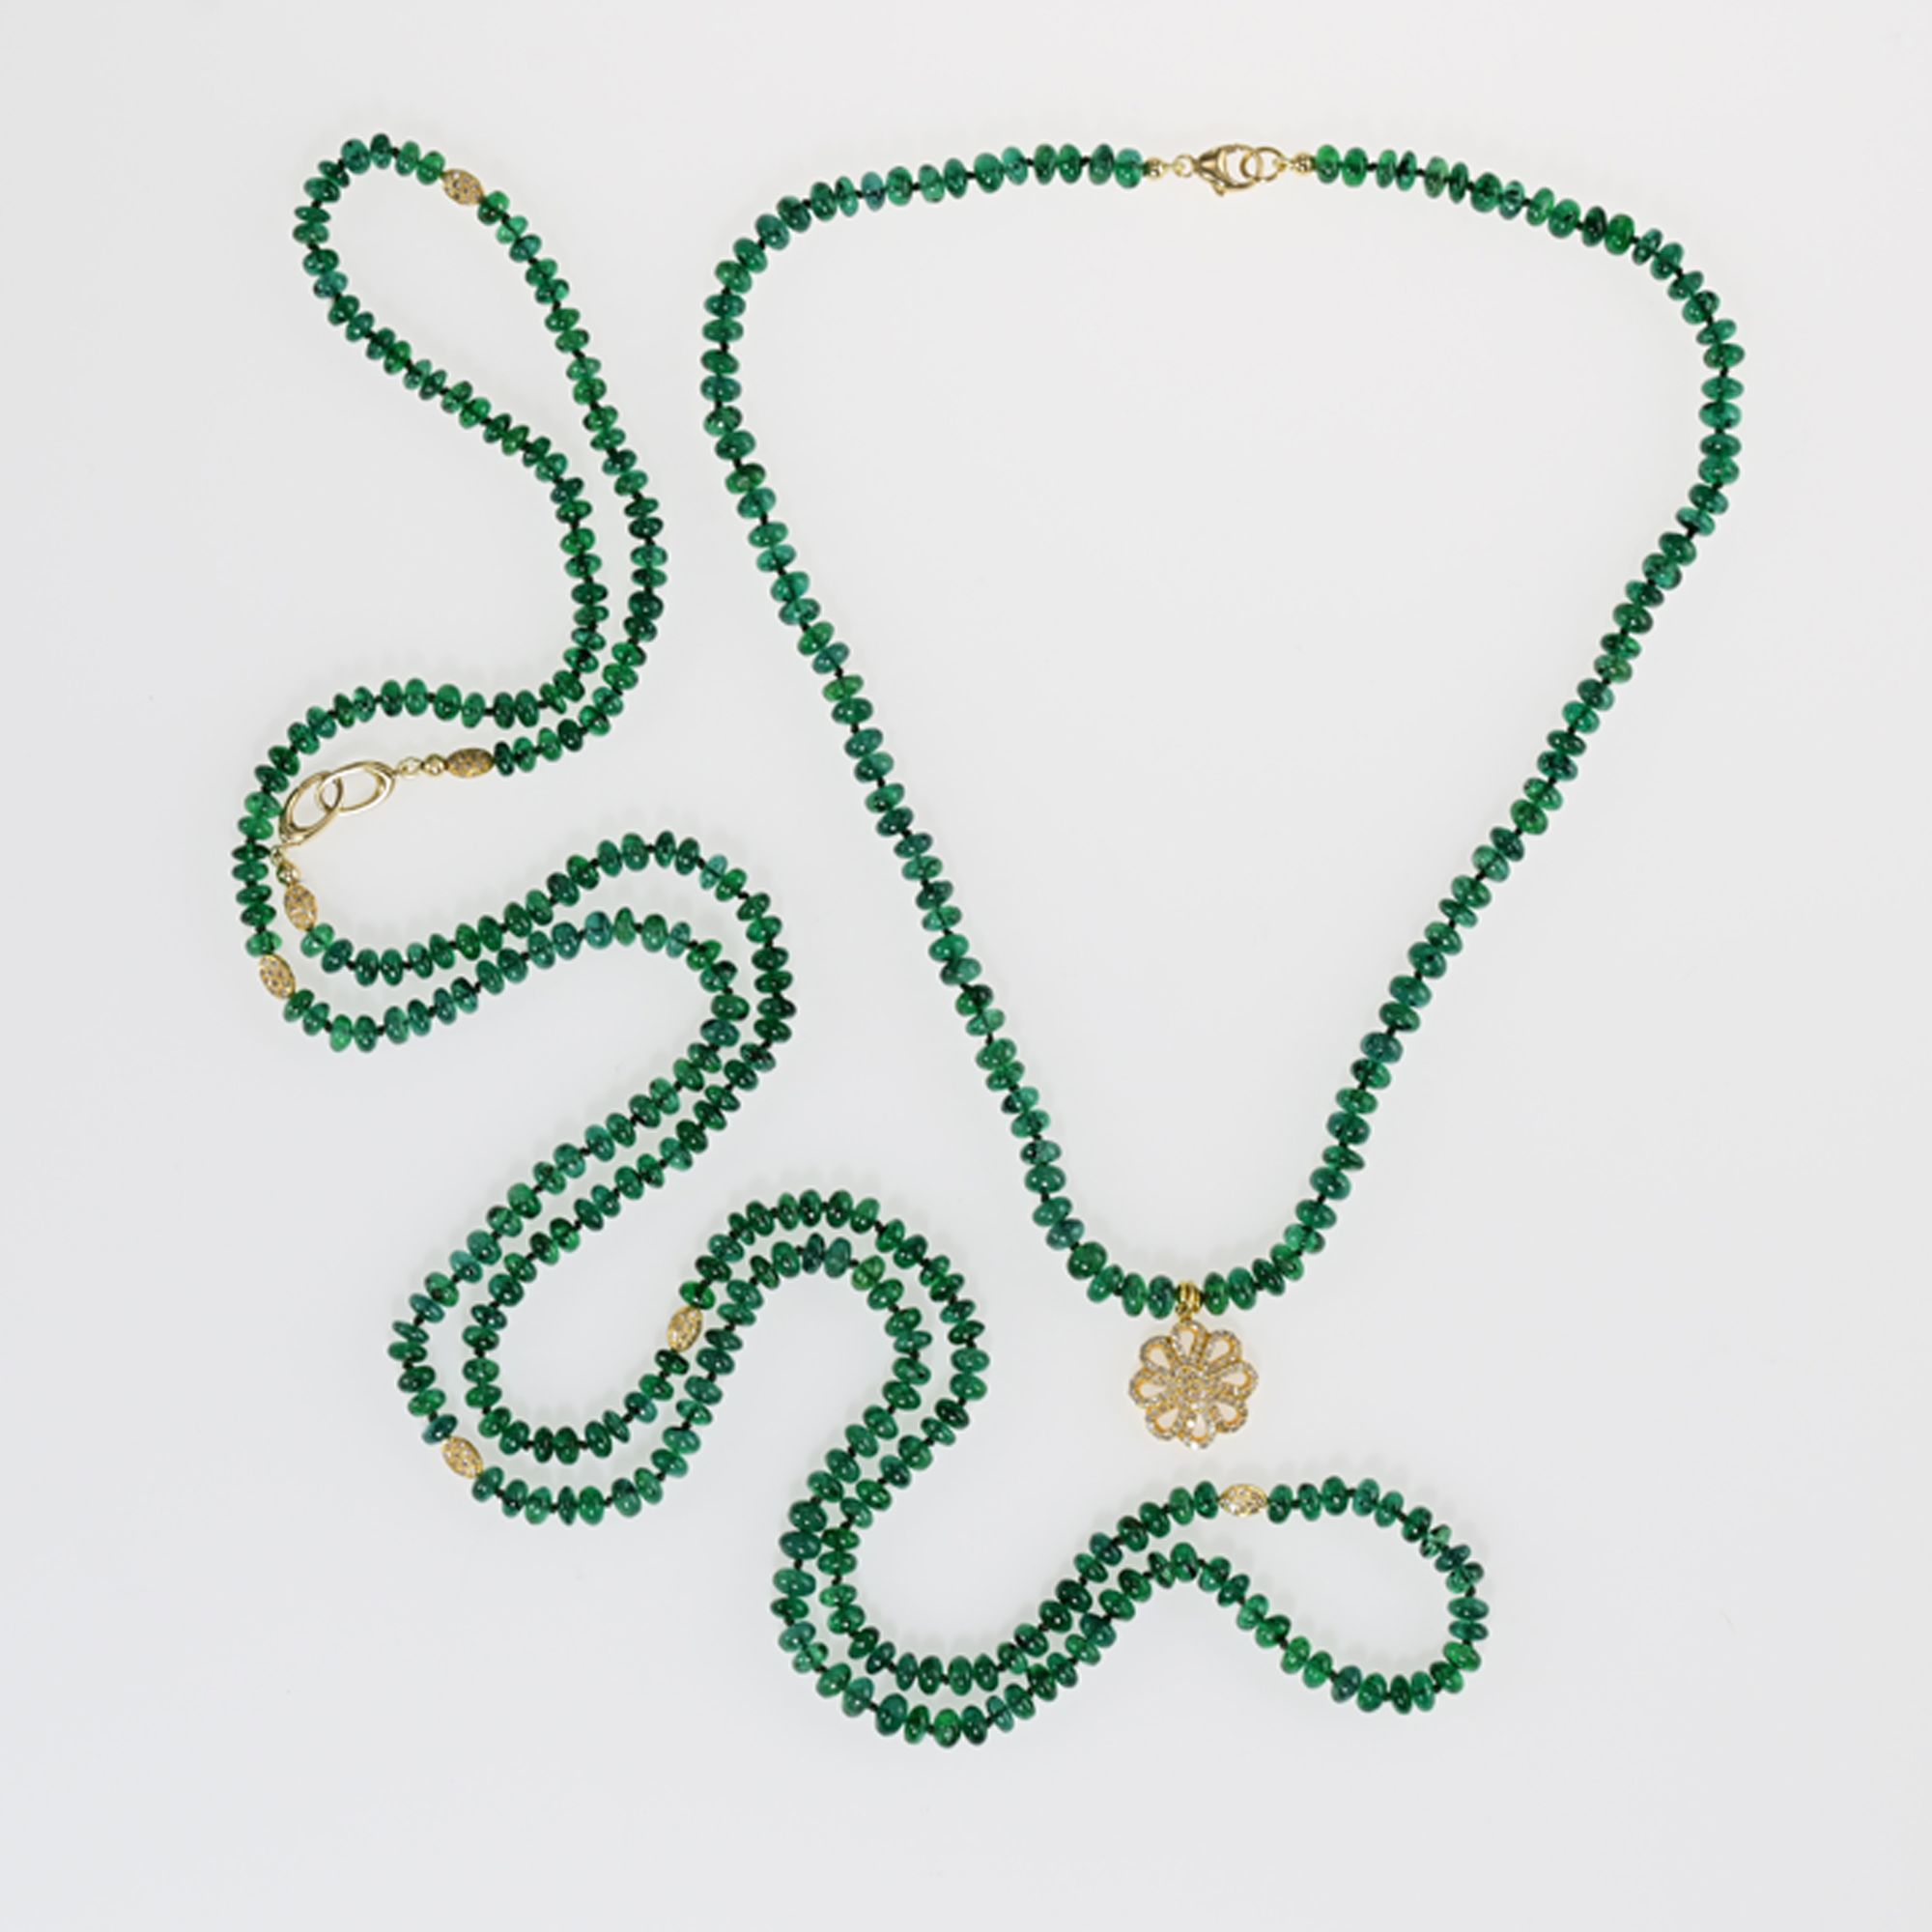 Fine Zambian Emerald necklaces with 18k and Diamonds